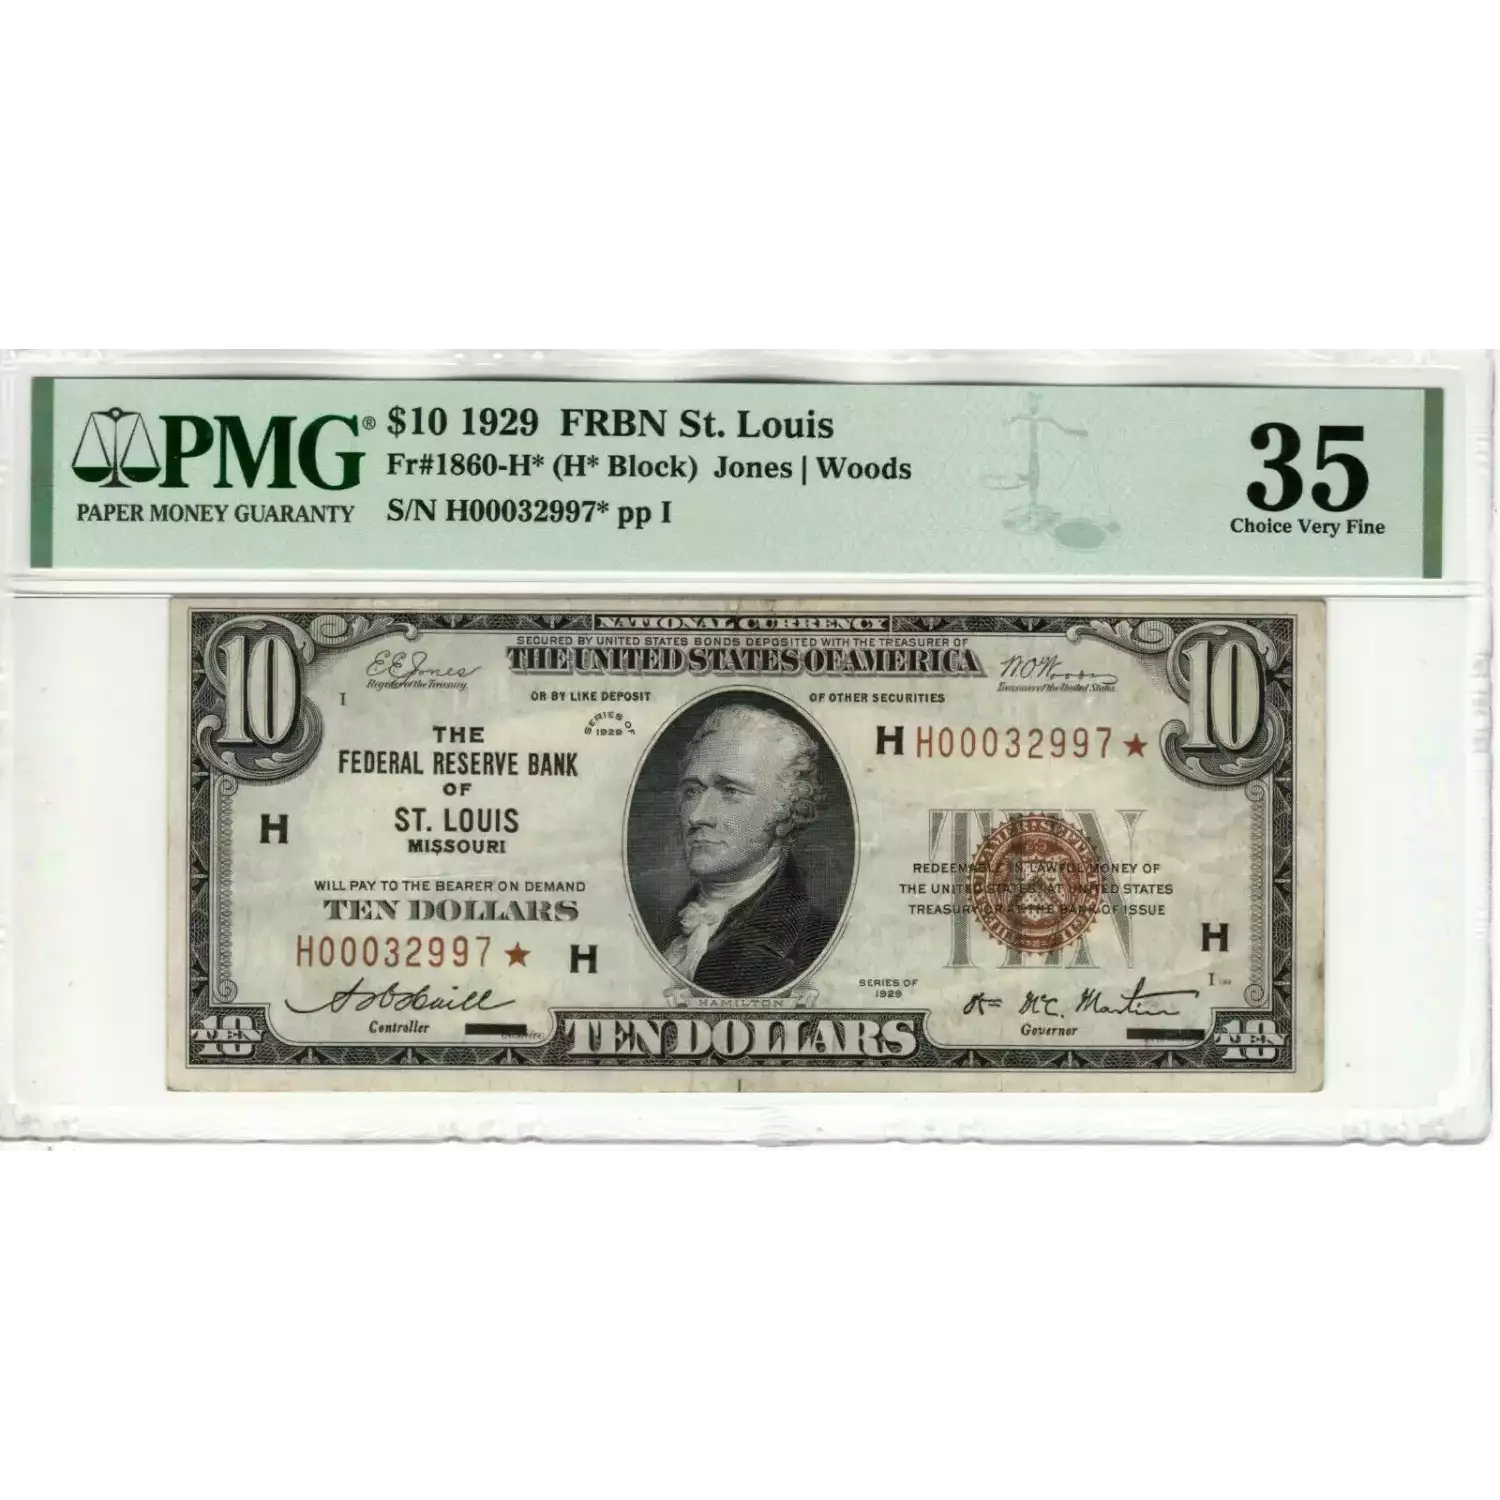 $10 1929 brown seal Small Federal Reserve Bank Notes 1860-H*